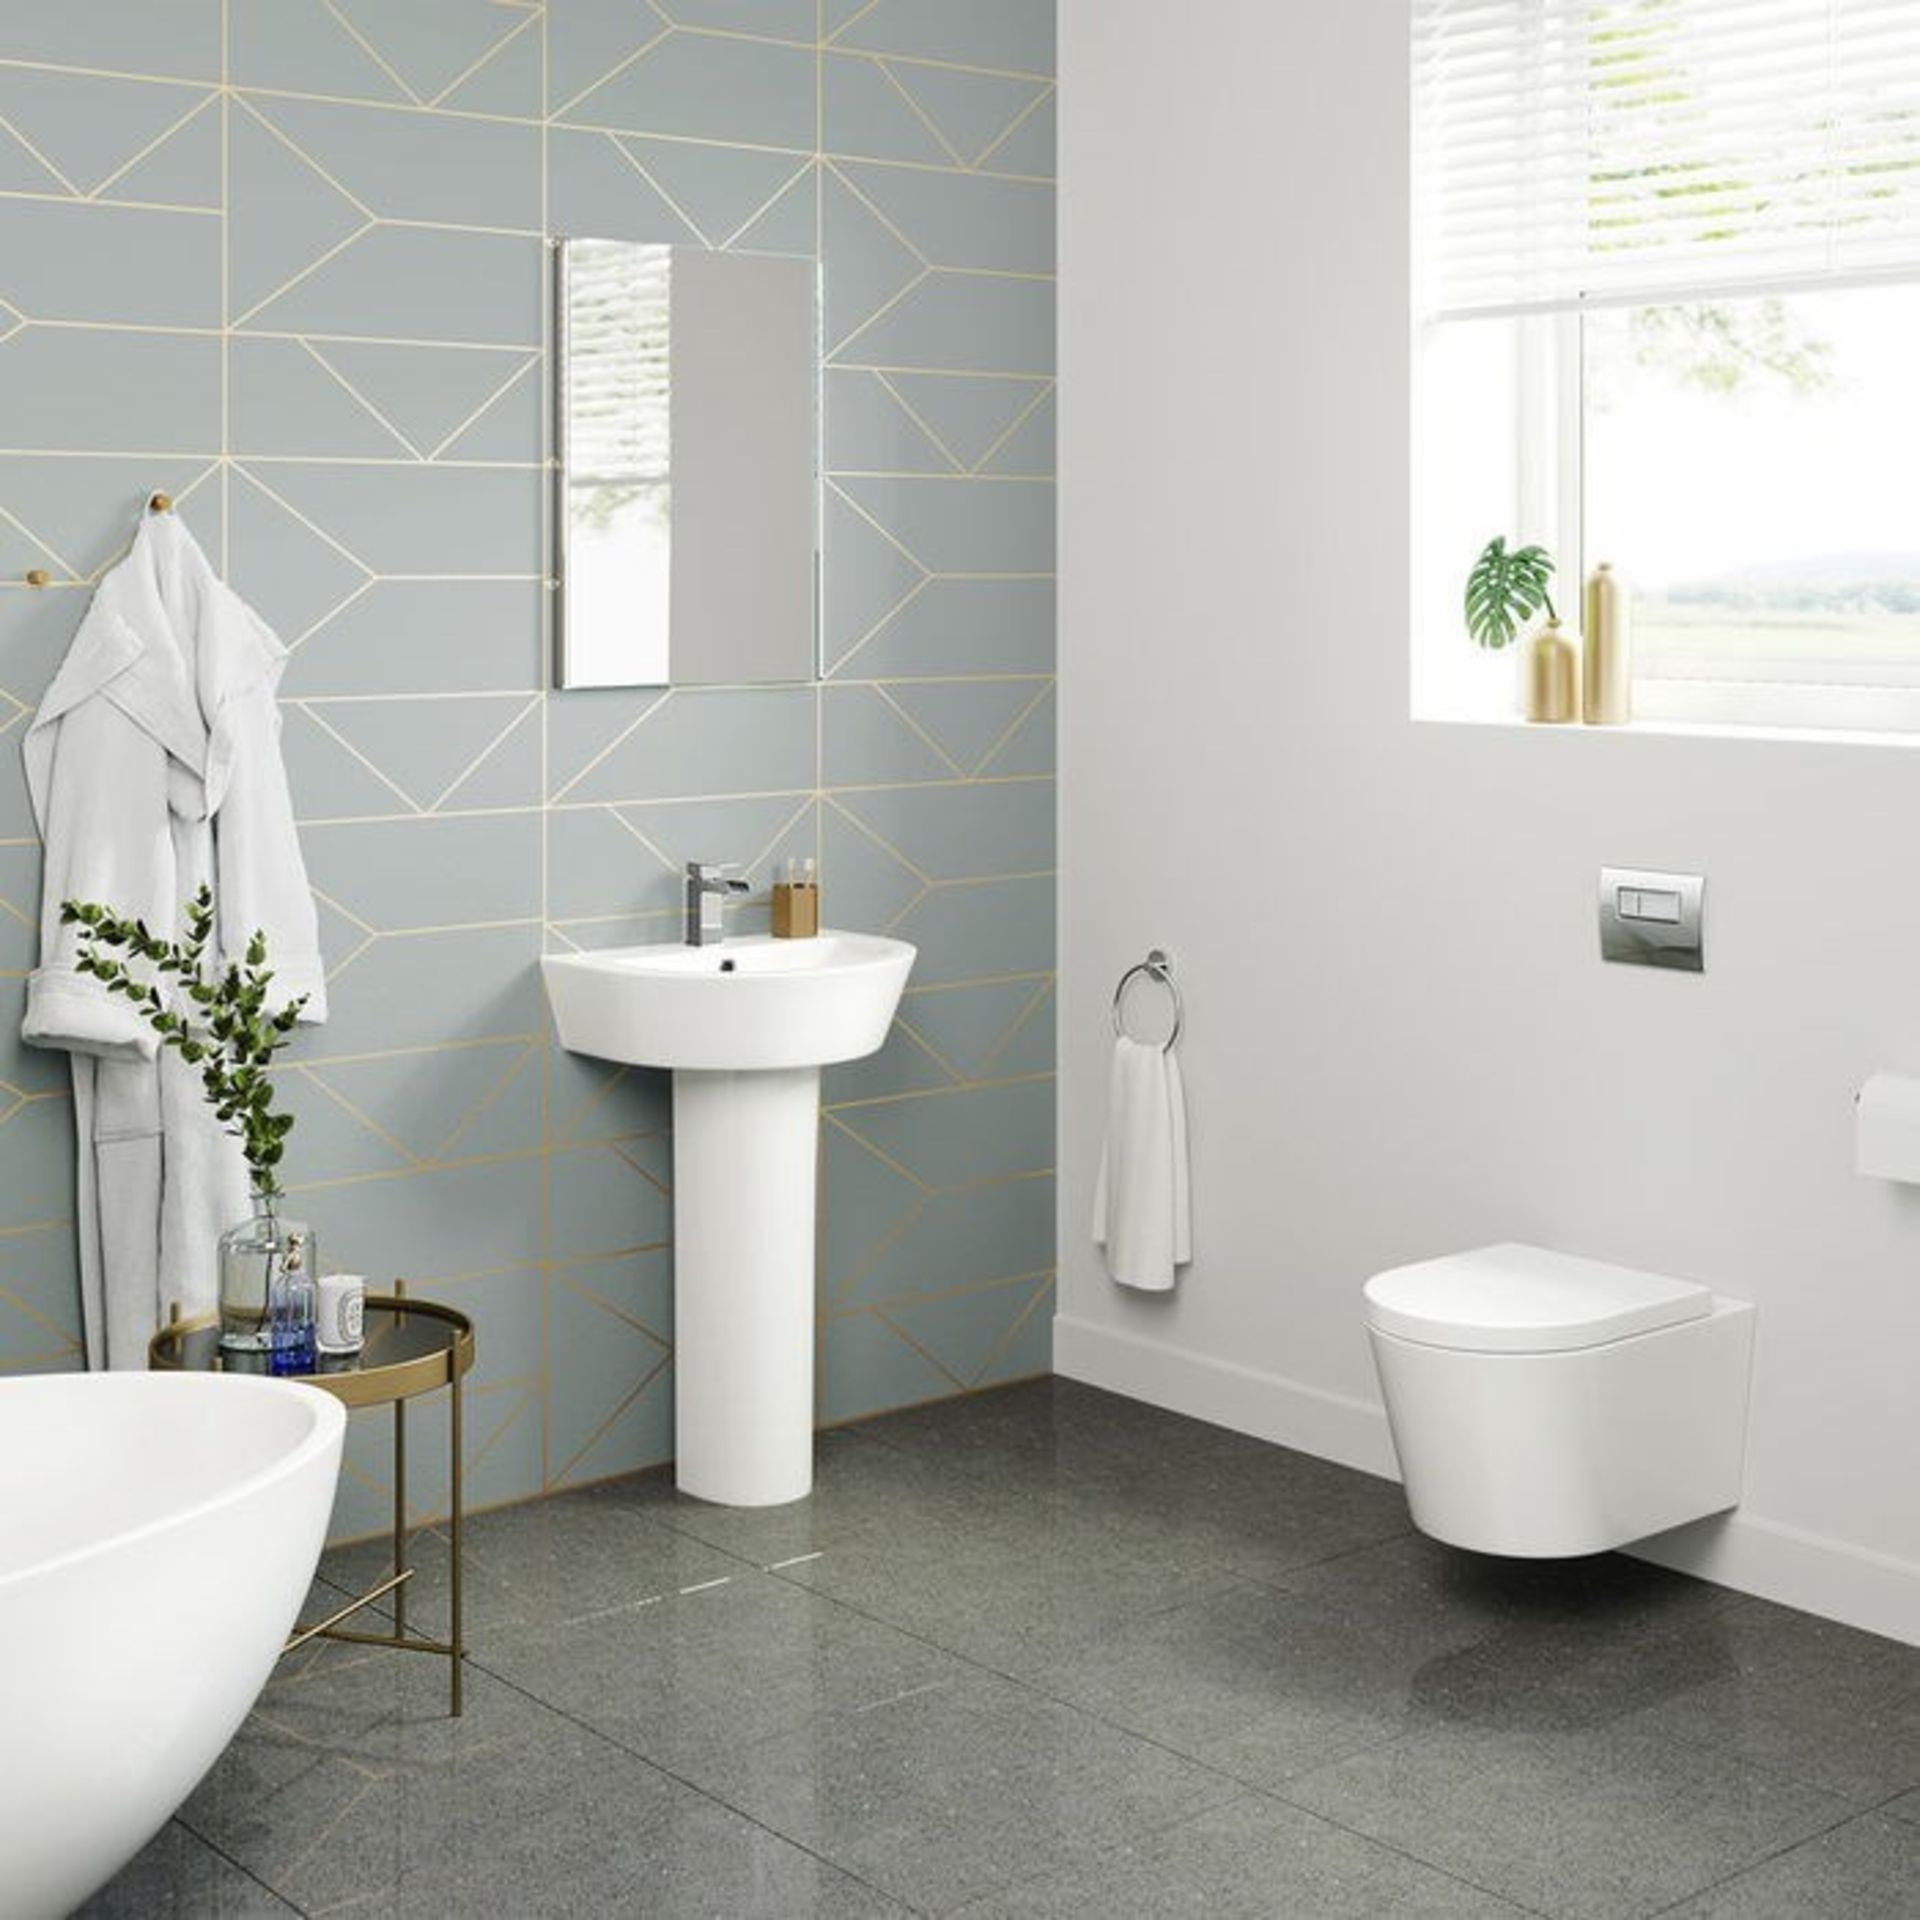 BRAND NEW BOXED Lyon II Wall Hung Toilet inc Luxury Soft Close Seat. RRP £349.99 each. - Image 2 of 2